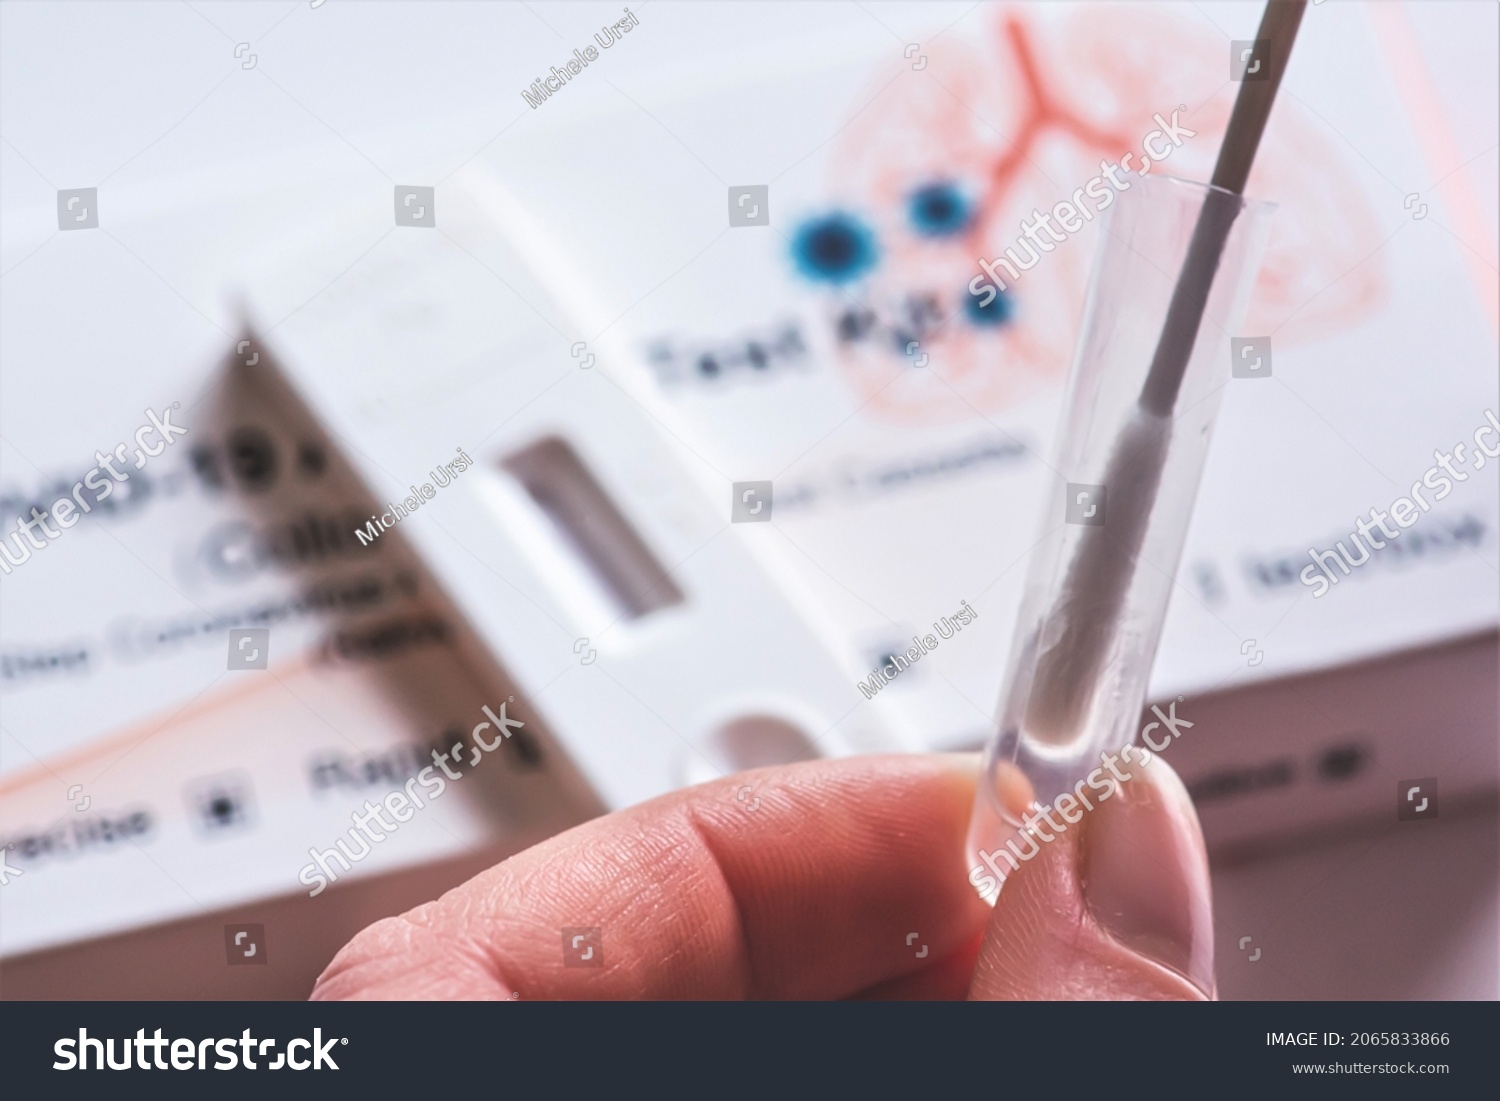 Covid-19, SARS‑CoV‑2 antigen test kit, one step coronavirus antigen rapid test, saliva swab, 1 test box with imagine of lungs and with fingers of a girl testing, close up #2065833866